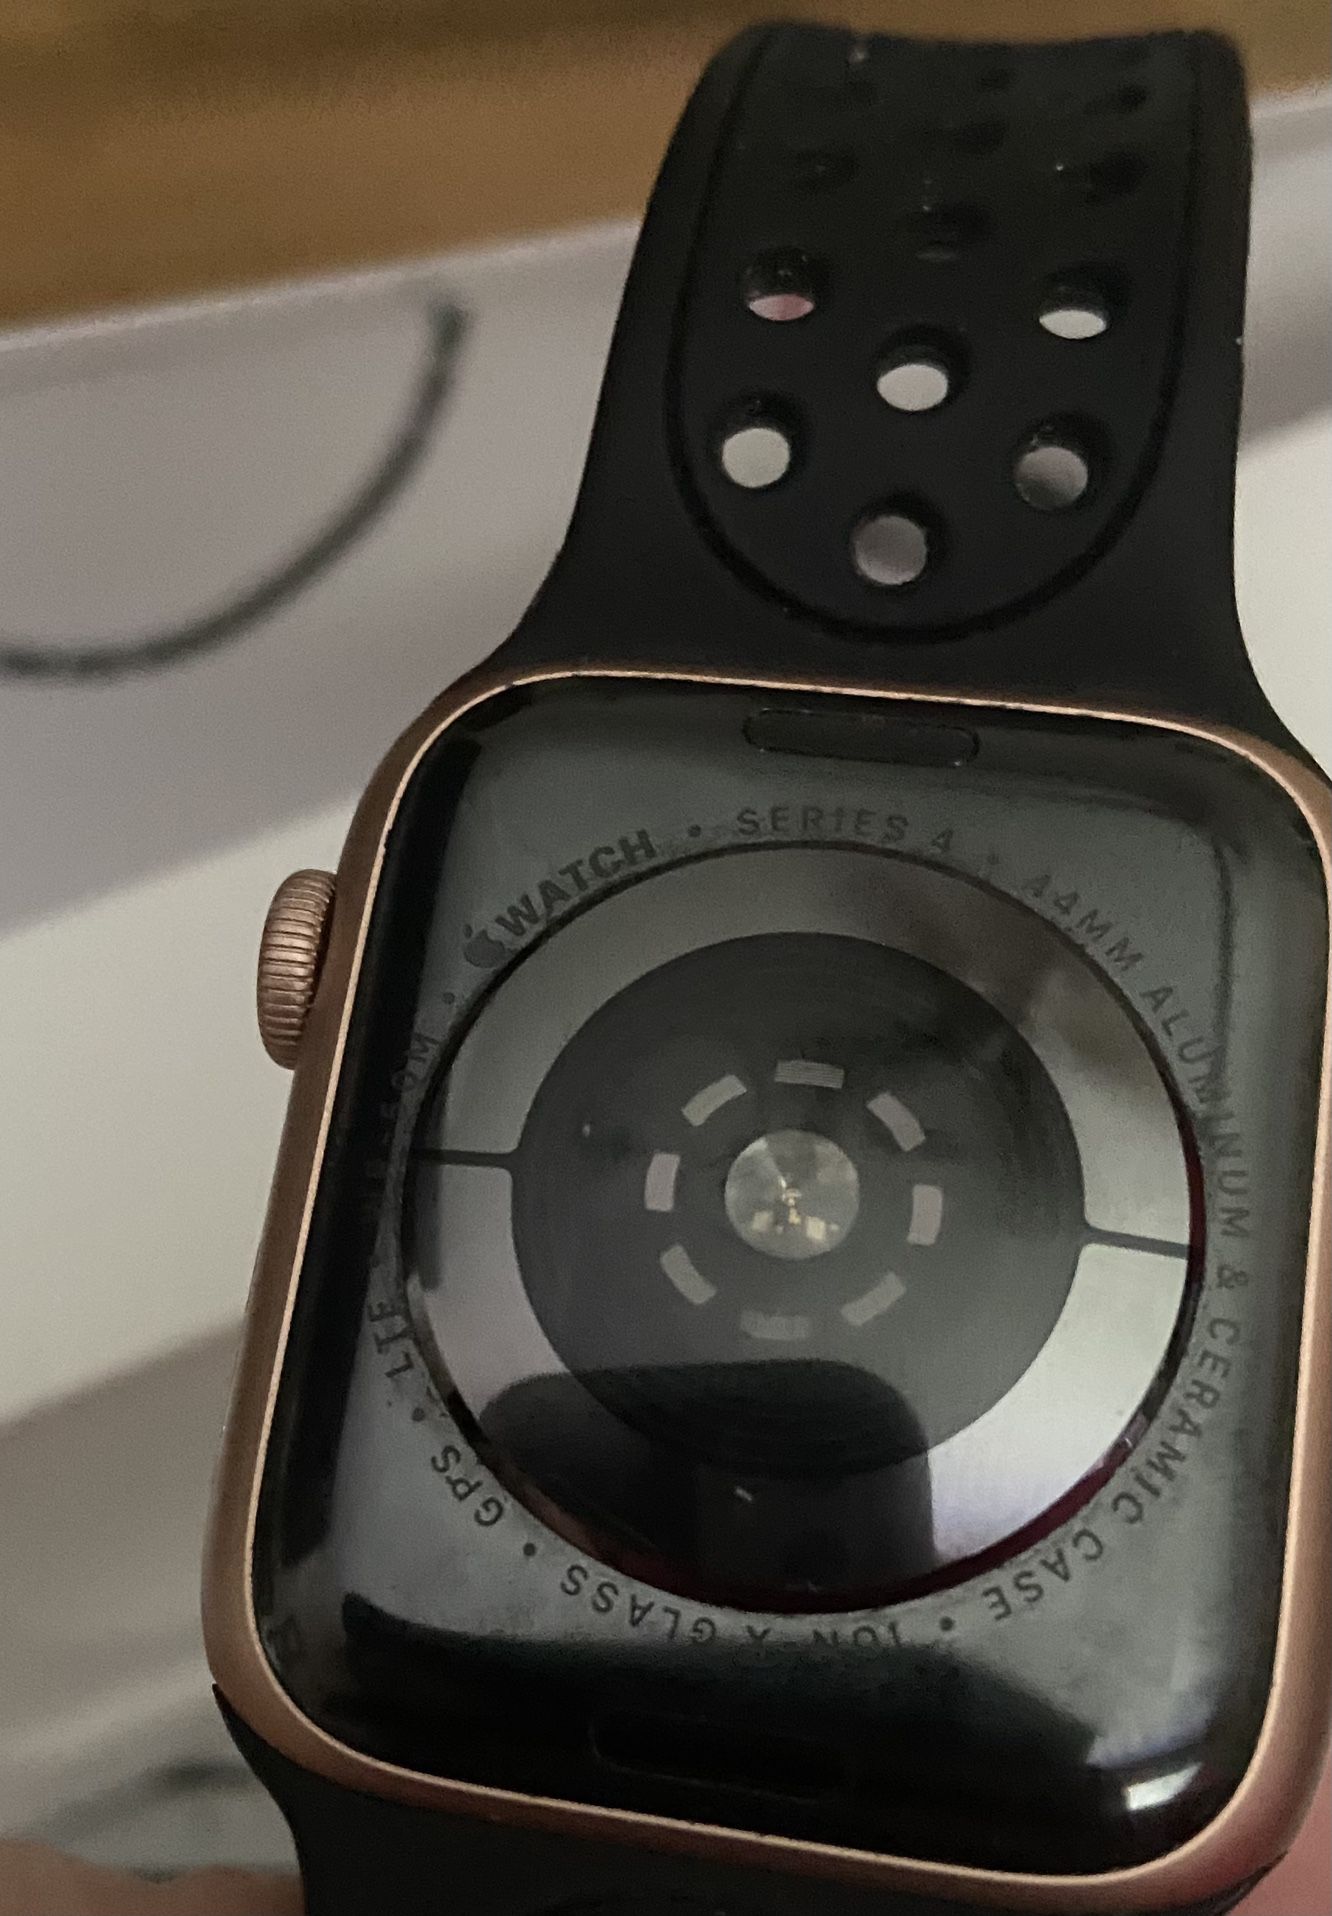 2 Apple Watches With cases